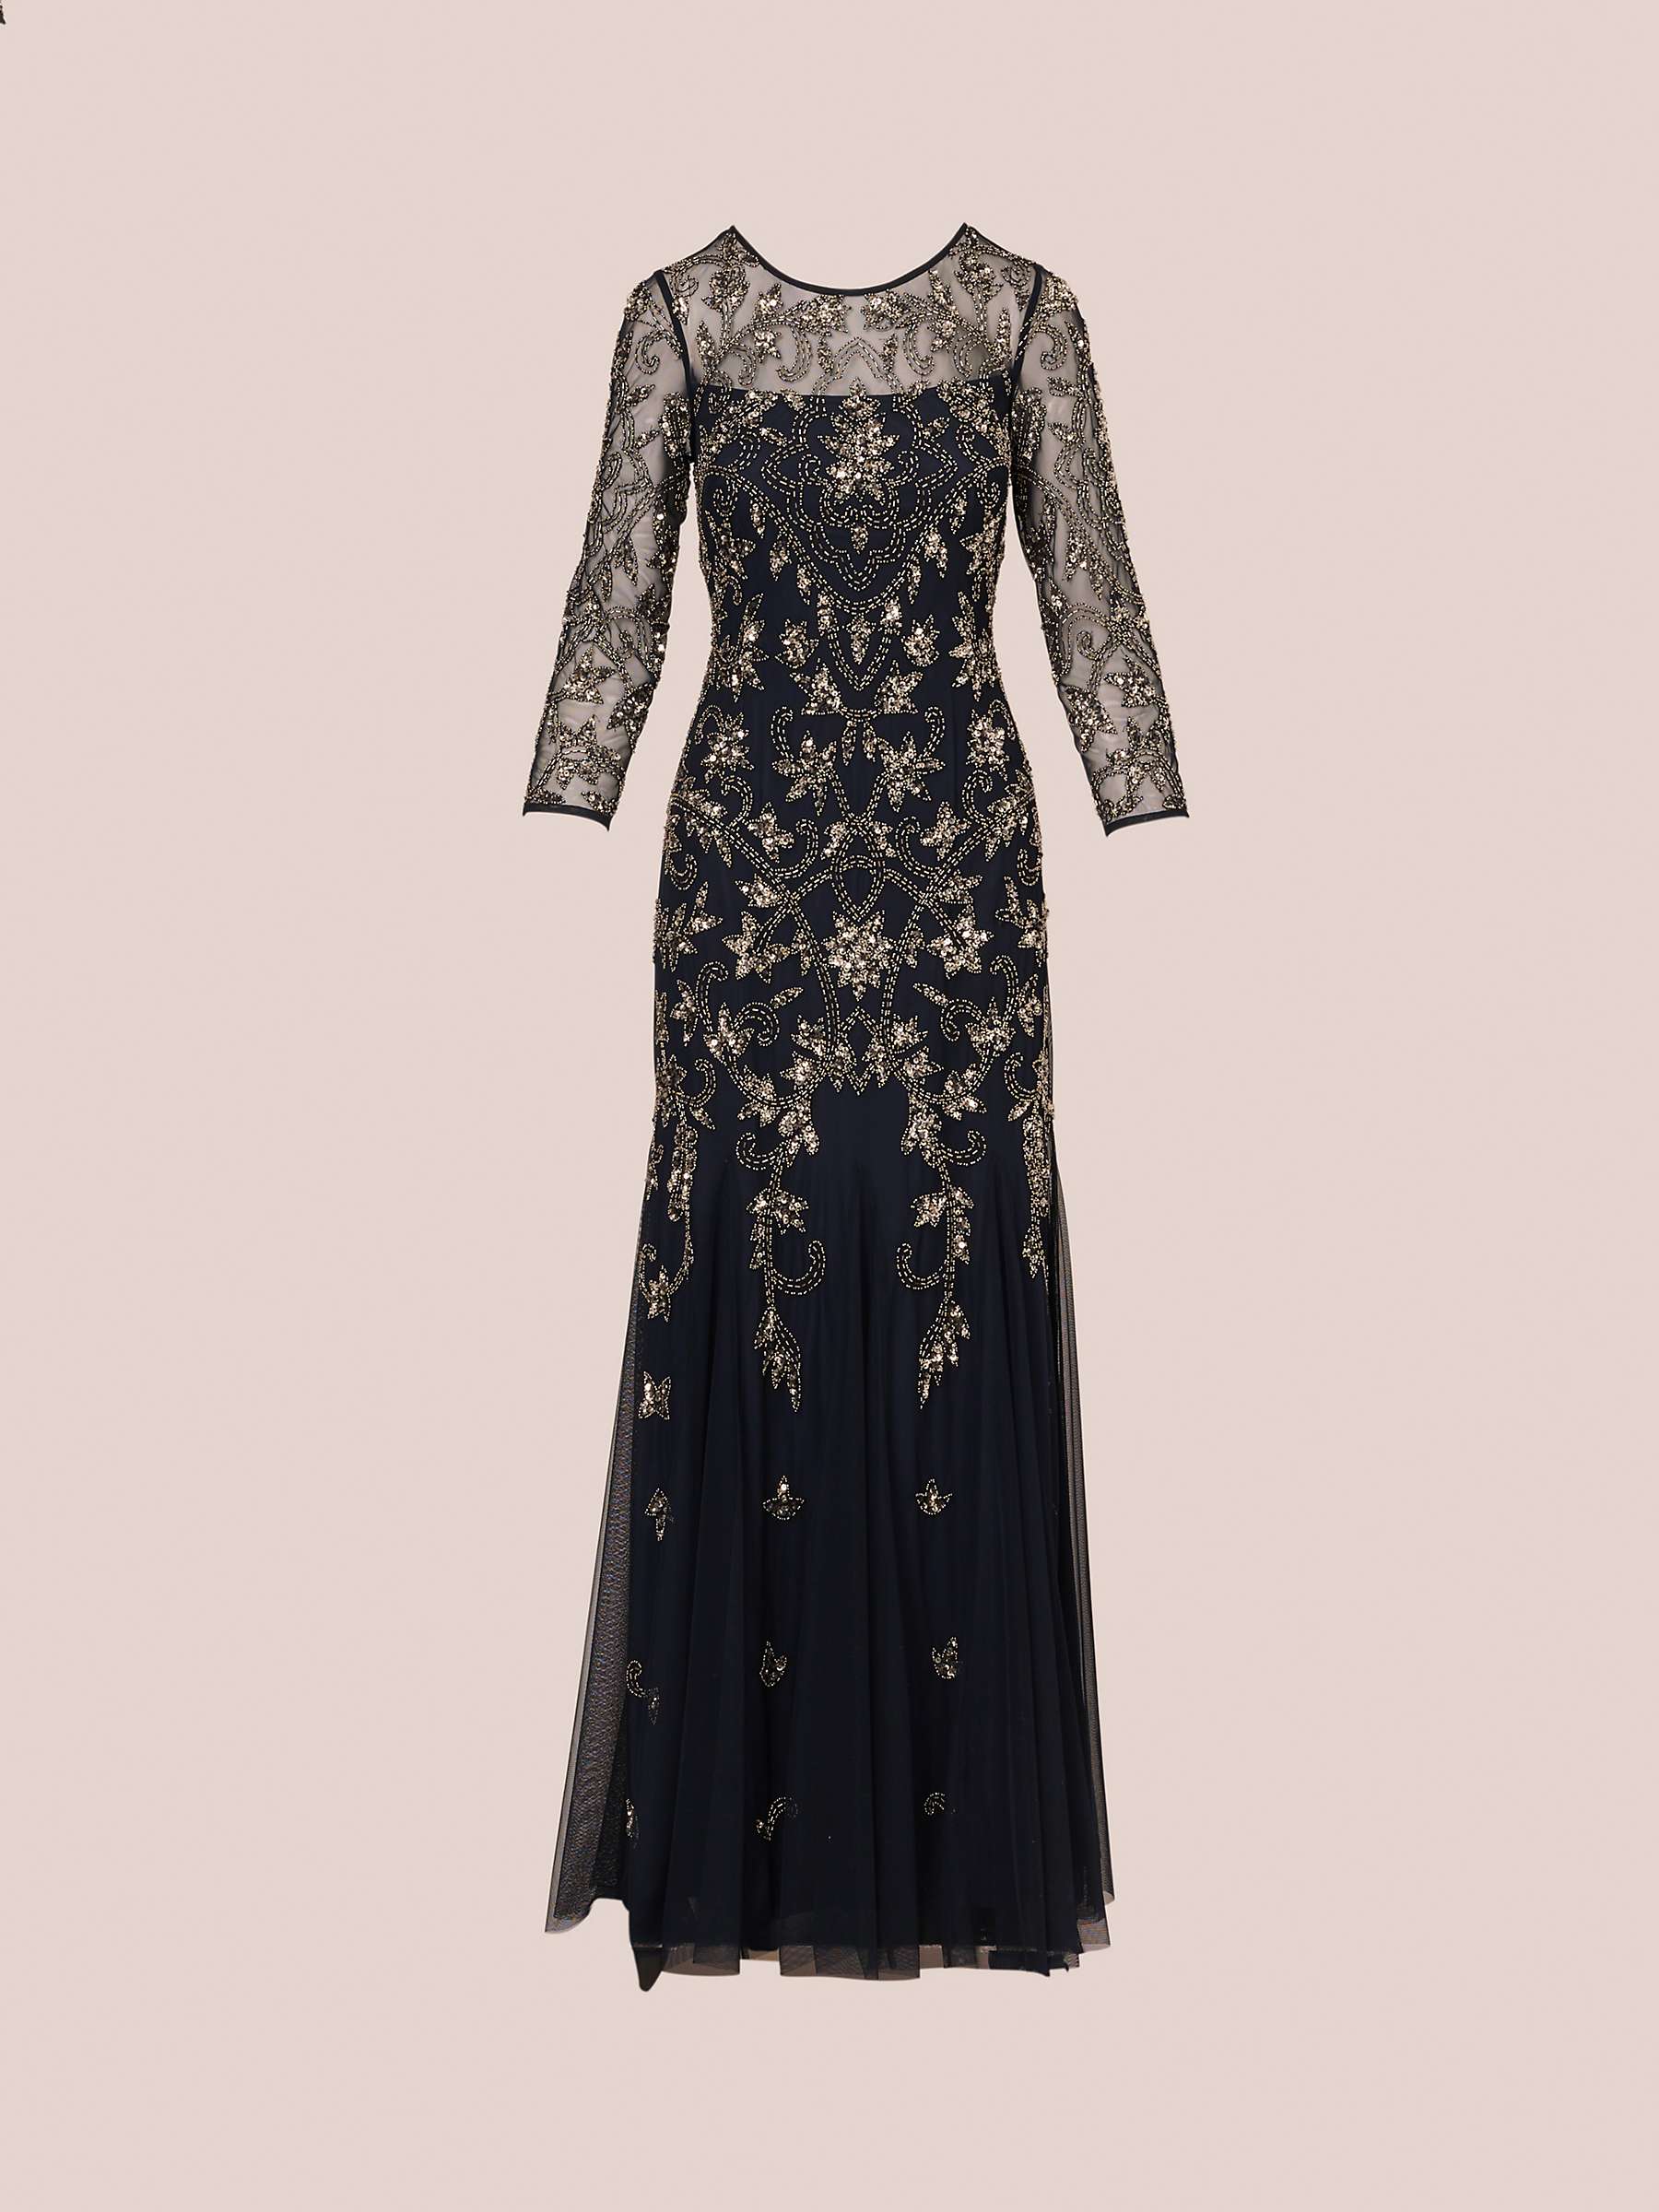 Buy Adrianna Papell Long Sleeve Beaded Dress, Midnight Online at johnlewis.com